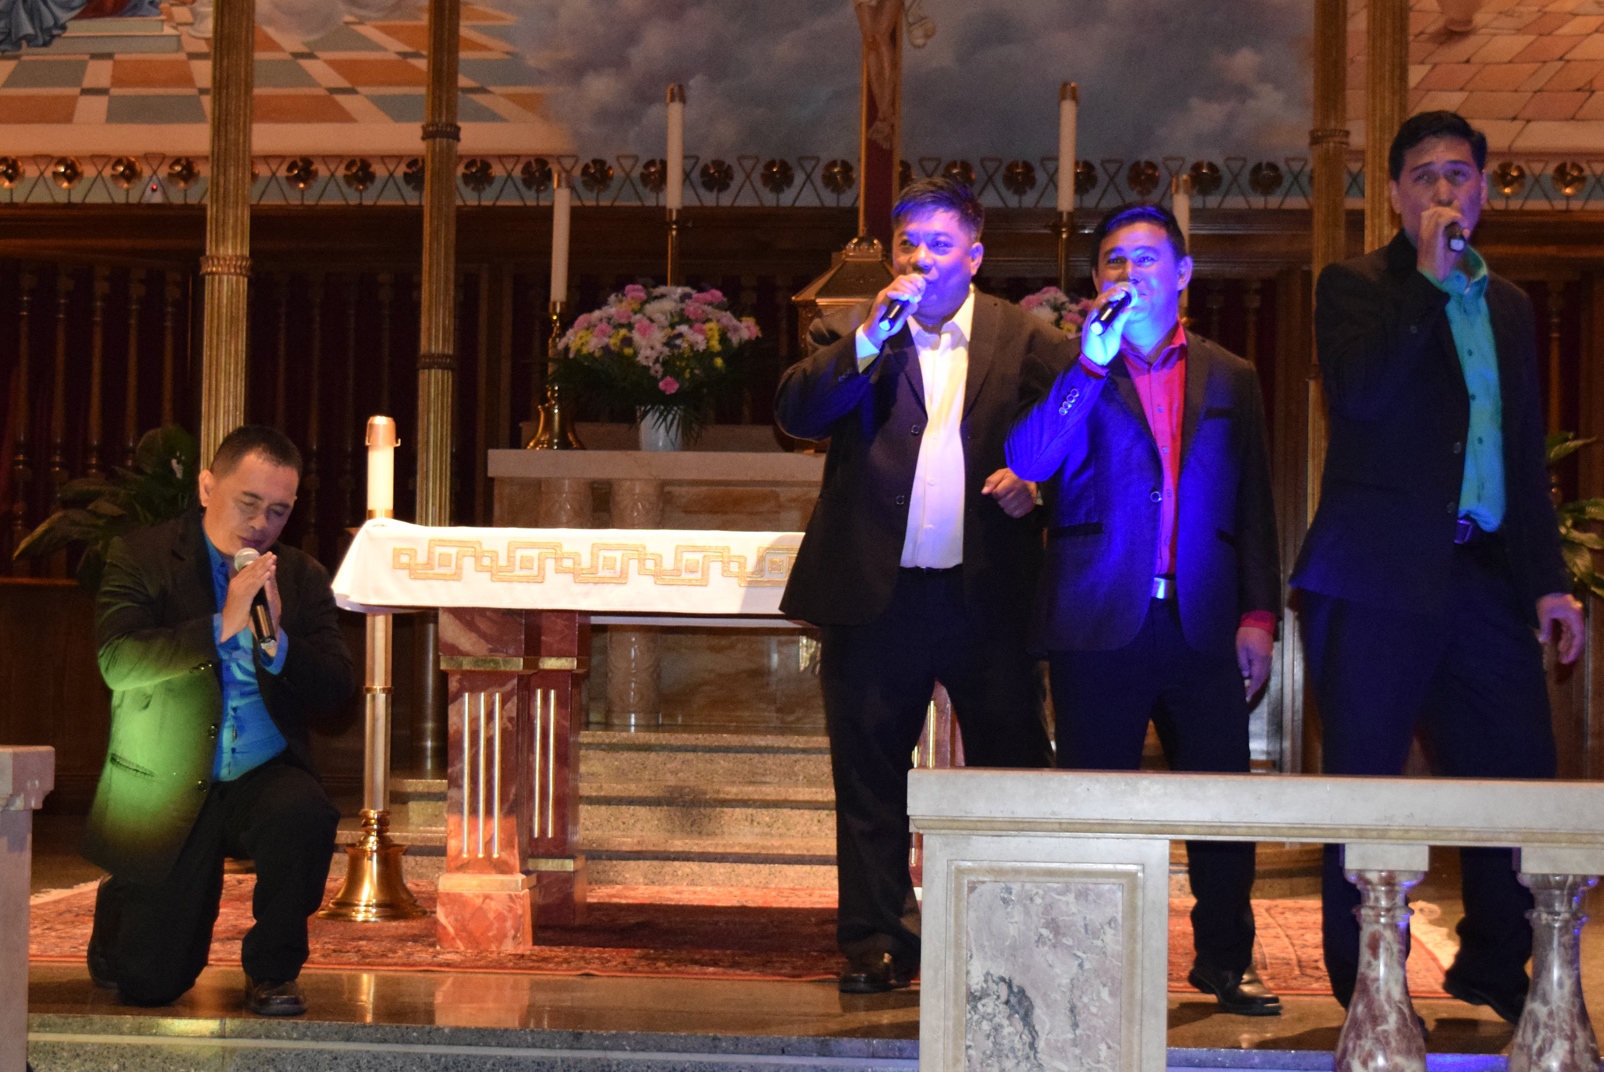 p The Cebu Clergy Performing Artists sang religious tunes and popular songs at a Sept. 4 concert at St. Sebastian Church, Woodside, to invite parishioners to the upcoming International Eucharistic Congress. The priests are Fathers Kipling Agravante, Jun Gutierrez, Zachary Zacarias and Rudy Ibale, M.S.C.